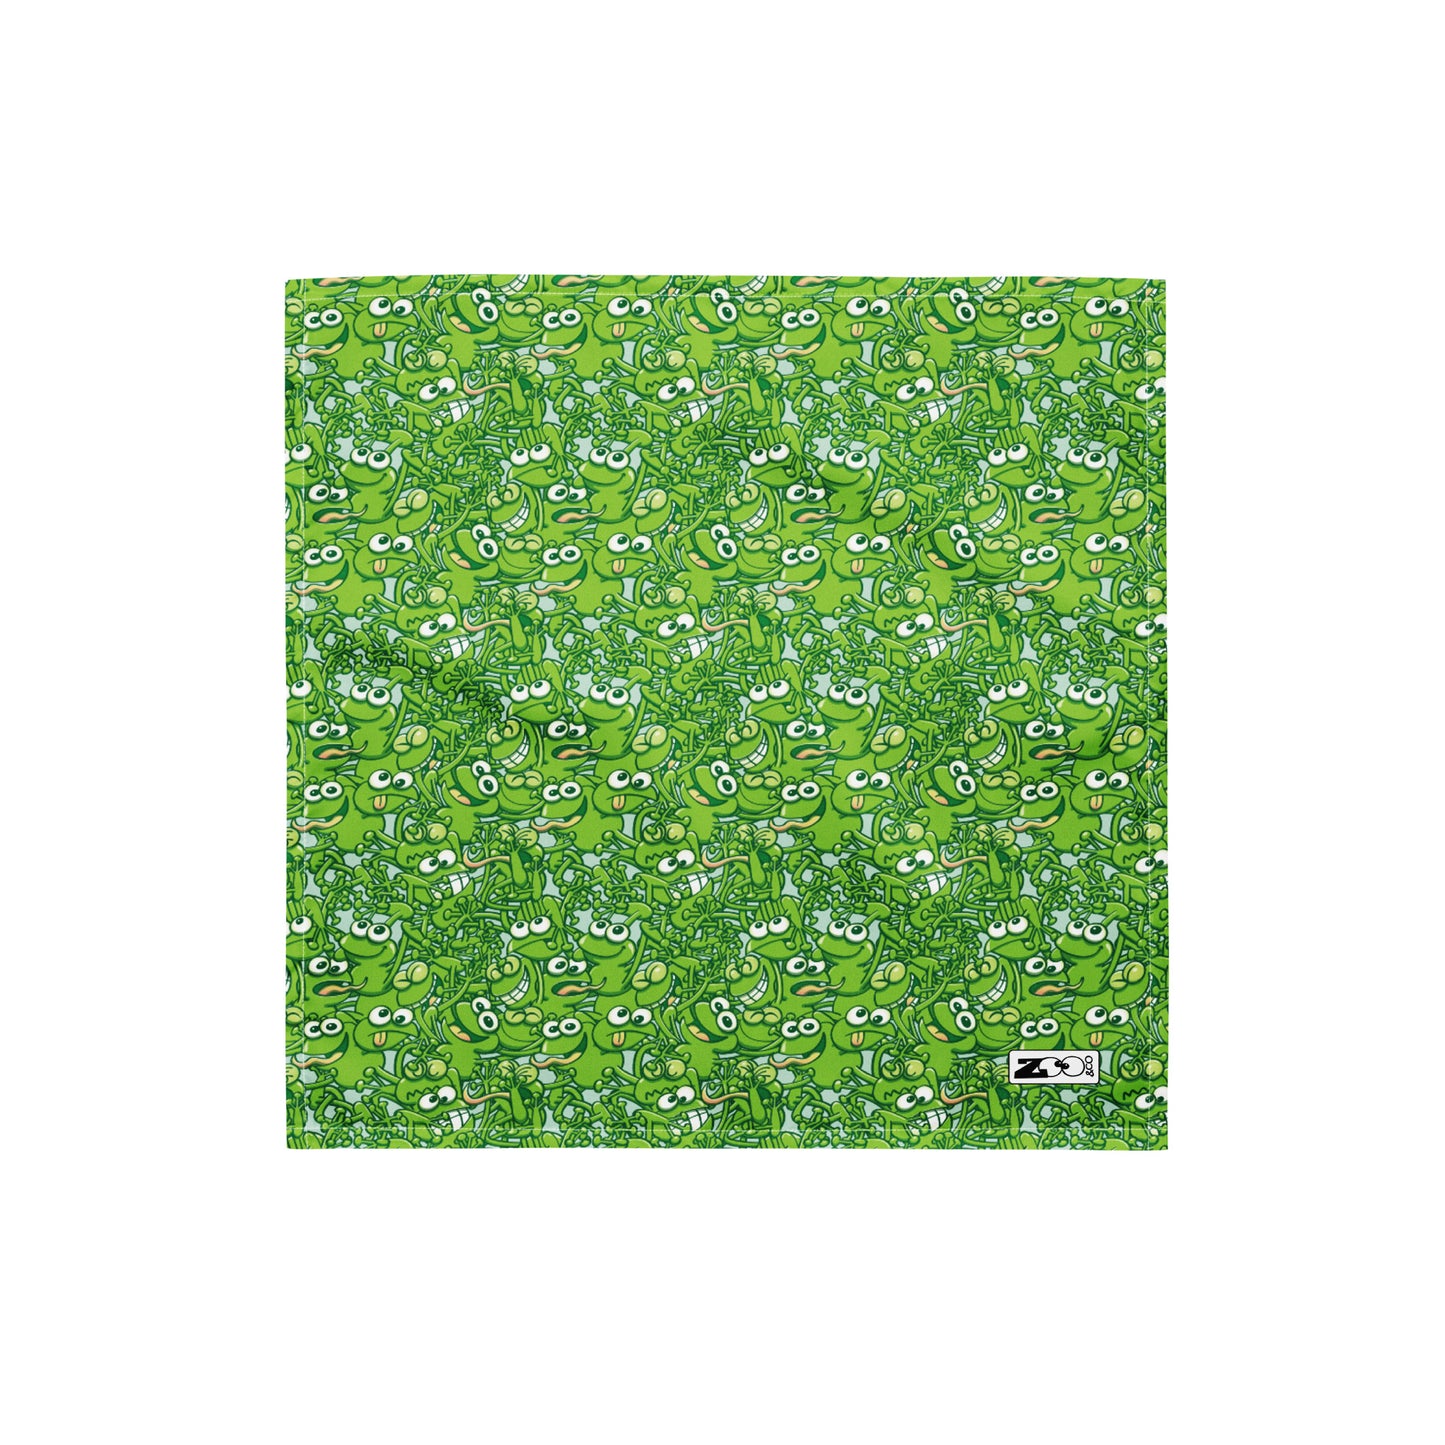 A tangled army of happy green frogs appears when the rain ends All-over print bandana. Small size